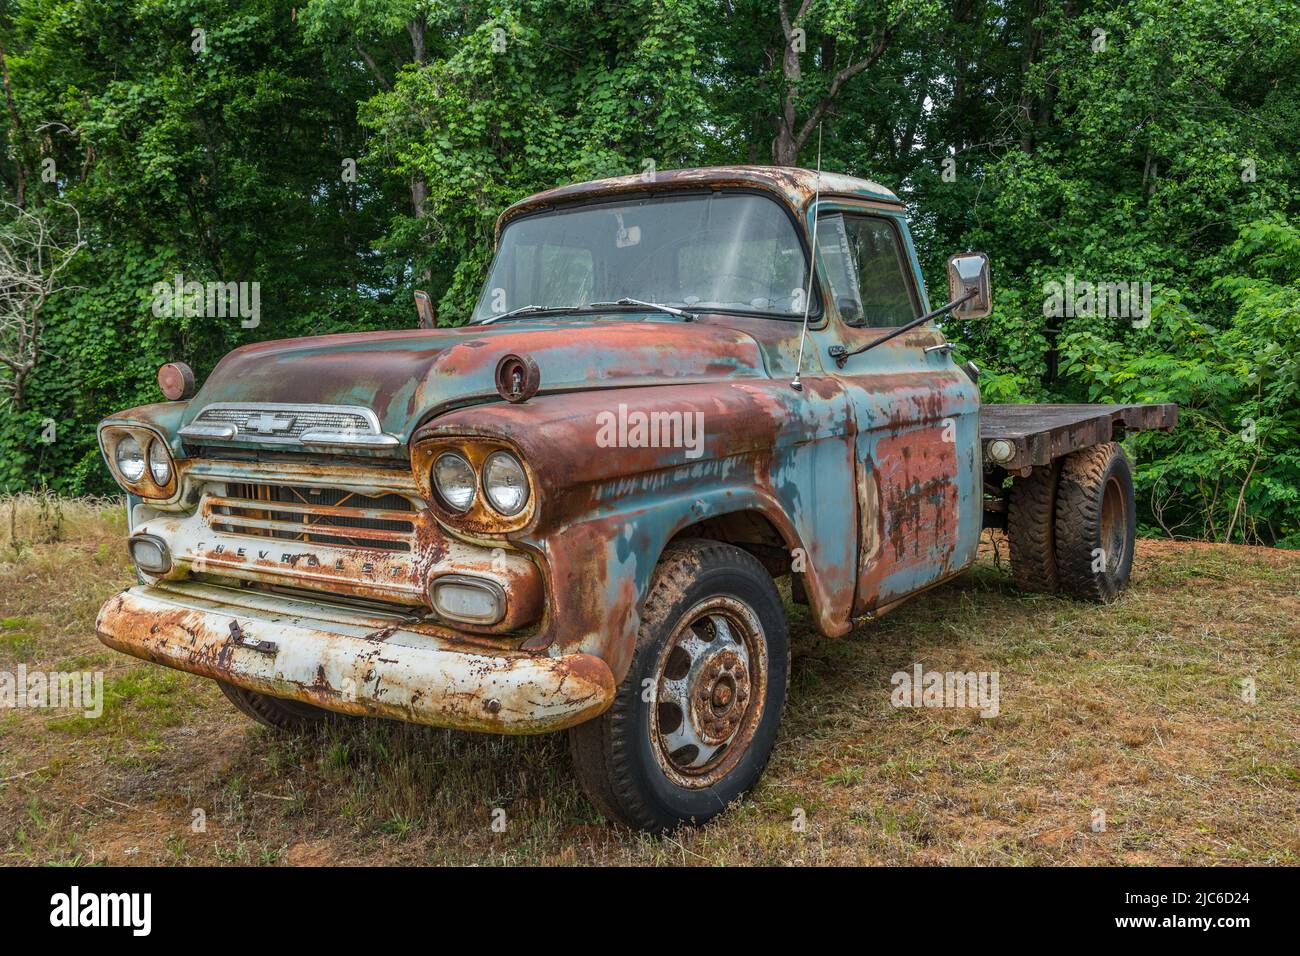 A late model 1950's Chevrolet Apache work truck with a flat-bed on the back still in running condition rusty and lots of patina used on the farm parke Stock Photo